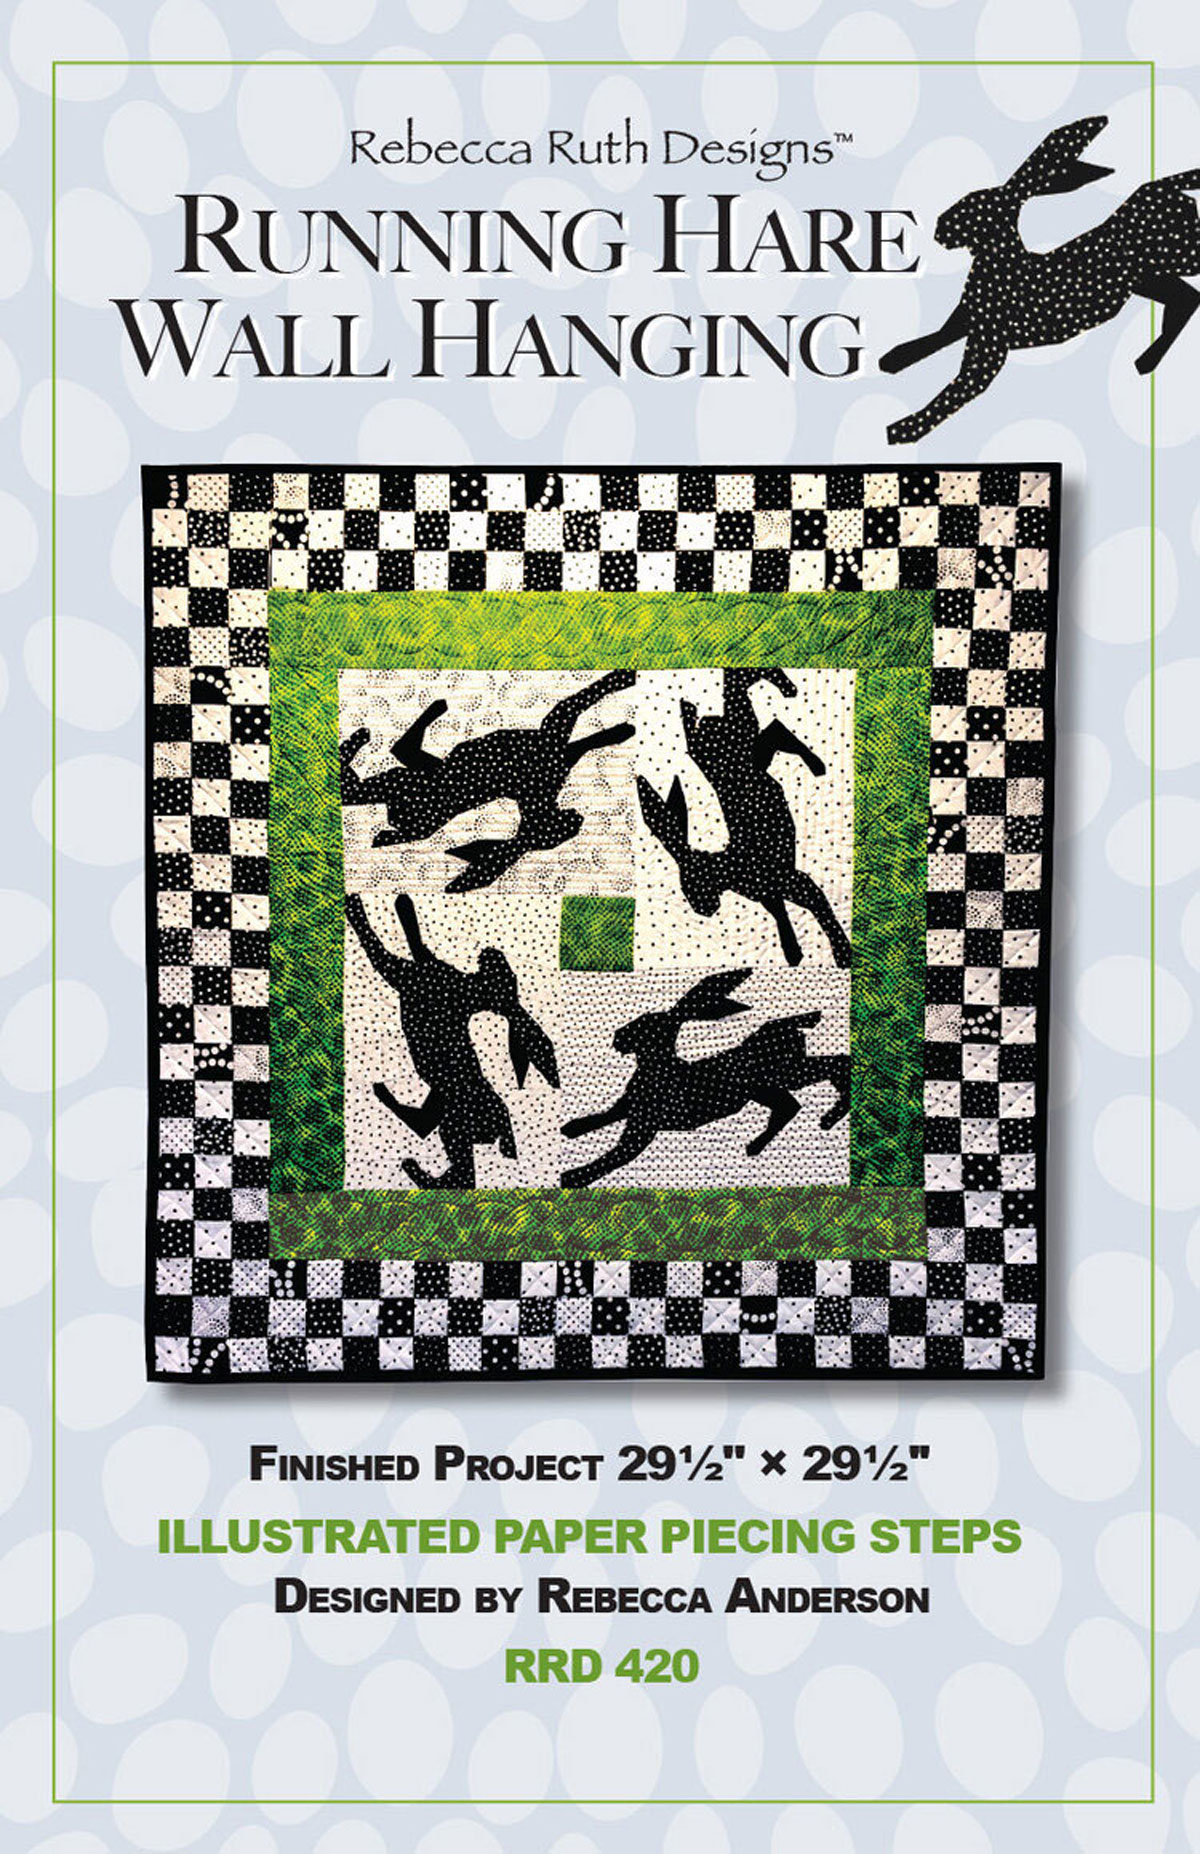 Running-Hare-wall-hanging-quilt-sewing-pattern-rebecca-ruth-designs-front